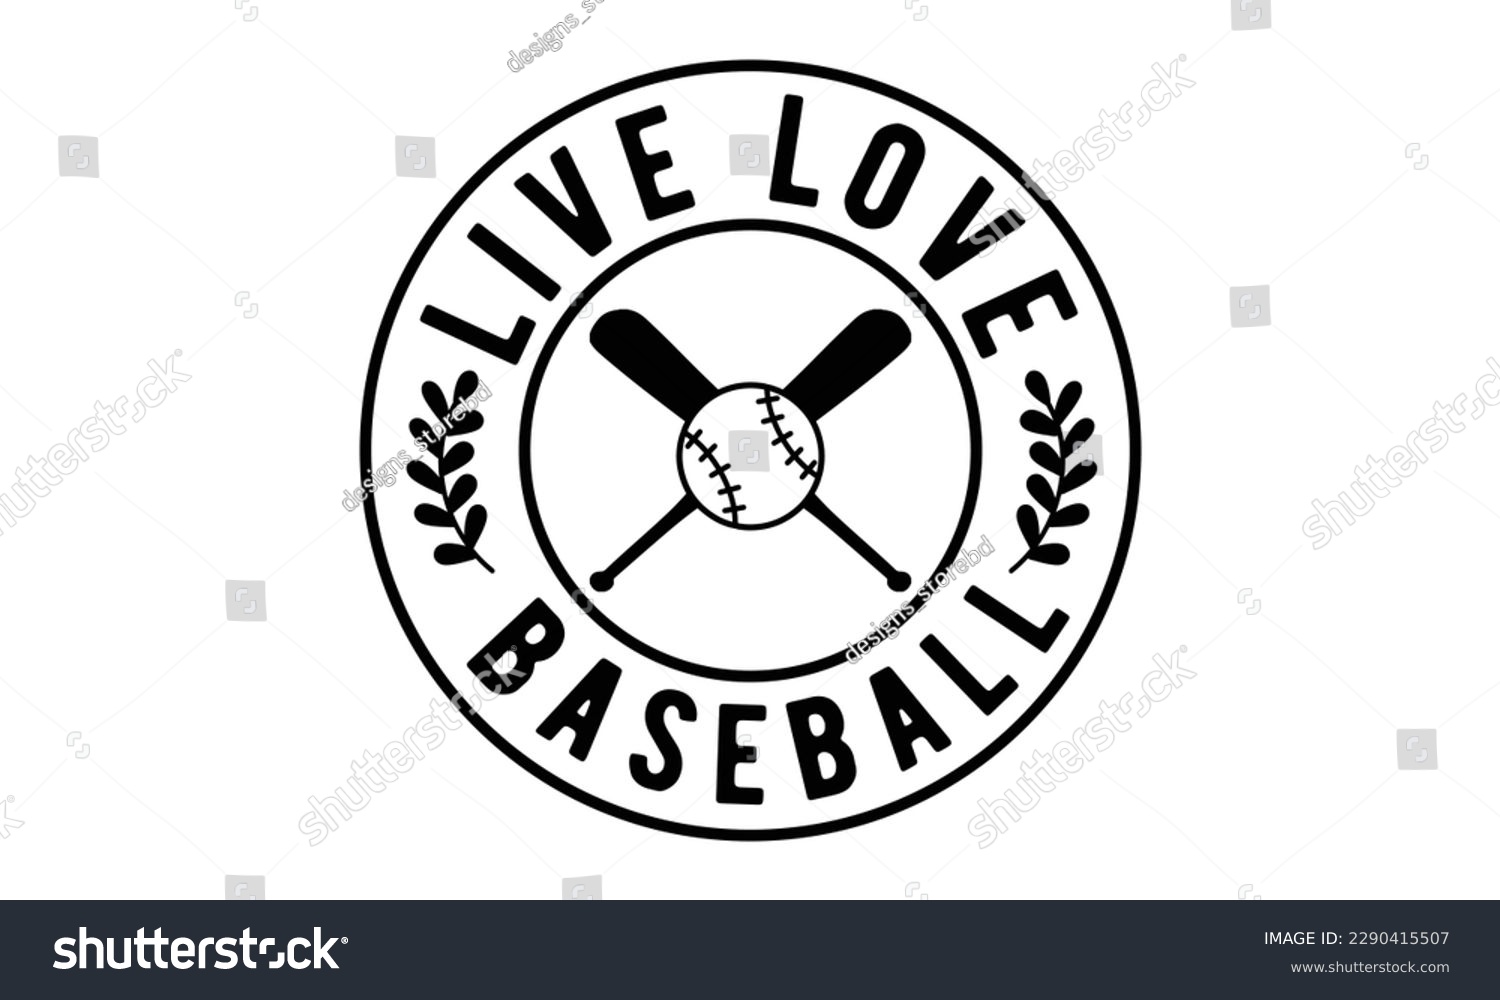 SVG of Live love baseball svg, baseball svg, Baseball Mom SVG Design, softball, softball mom life, Baseball svg bundle, Files for Cutting Typography Circuit and Silhouette, Mom Life svg